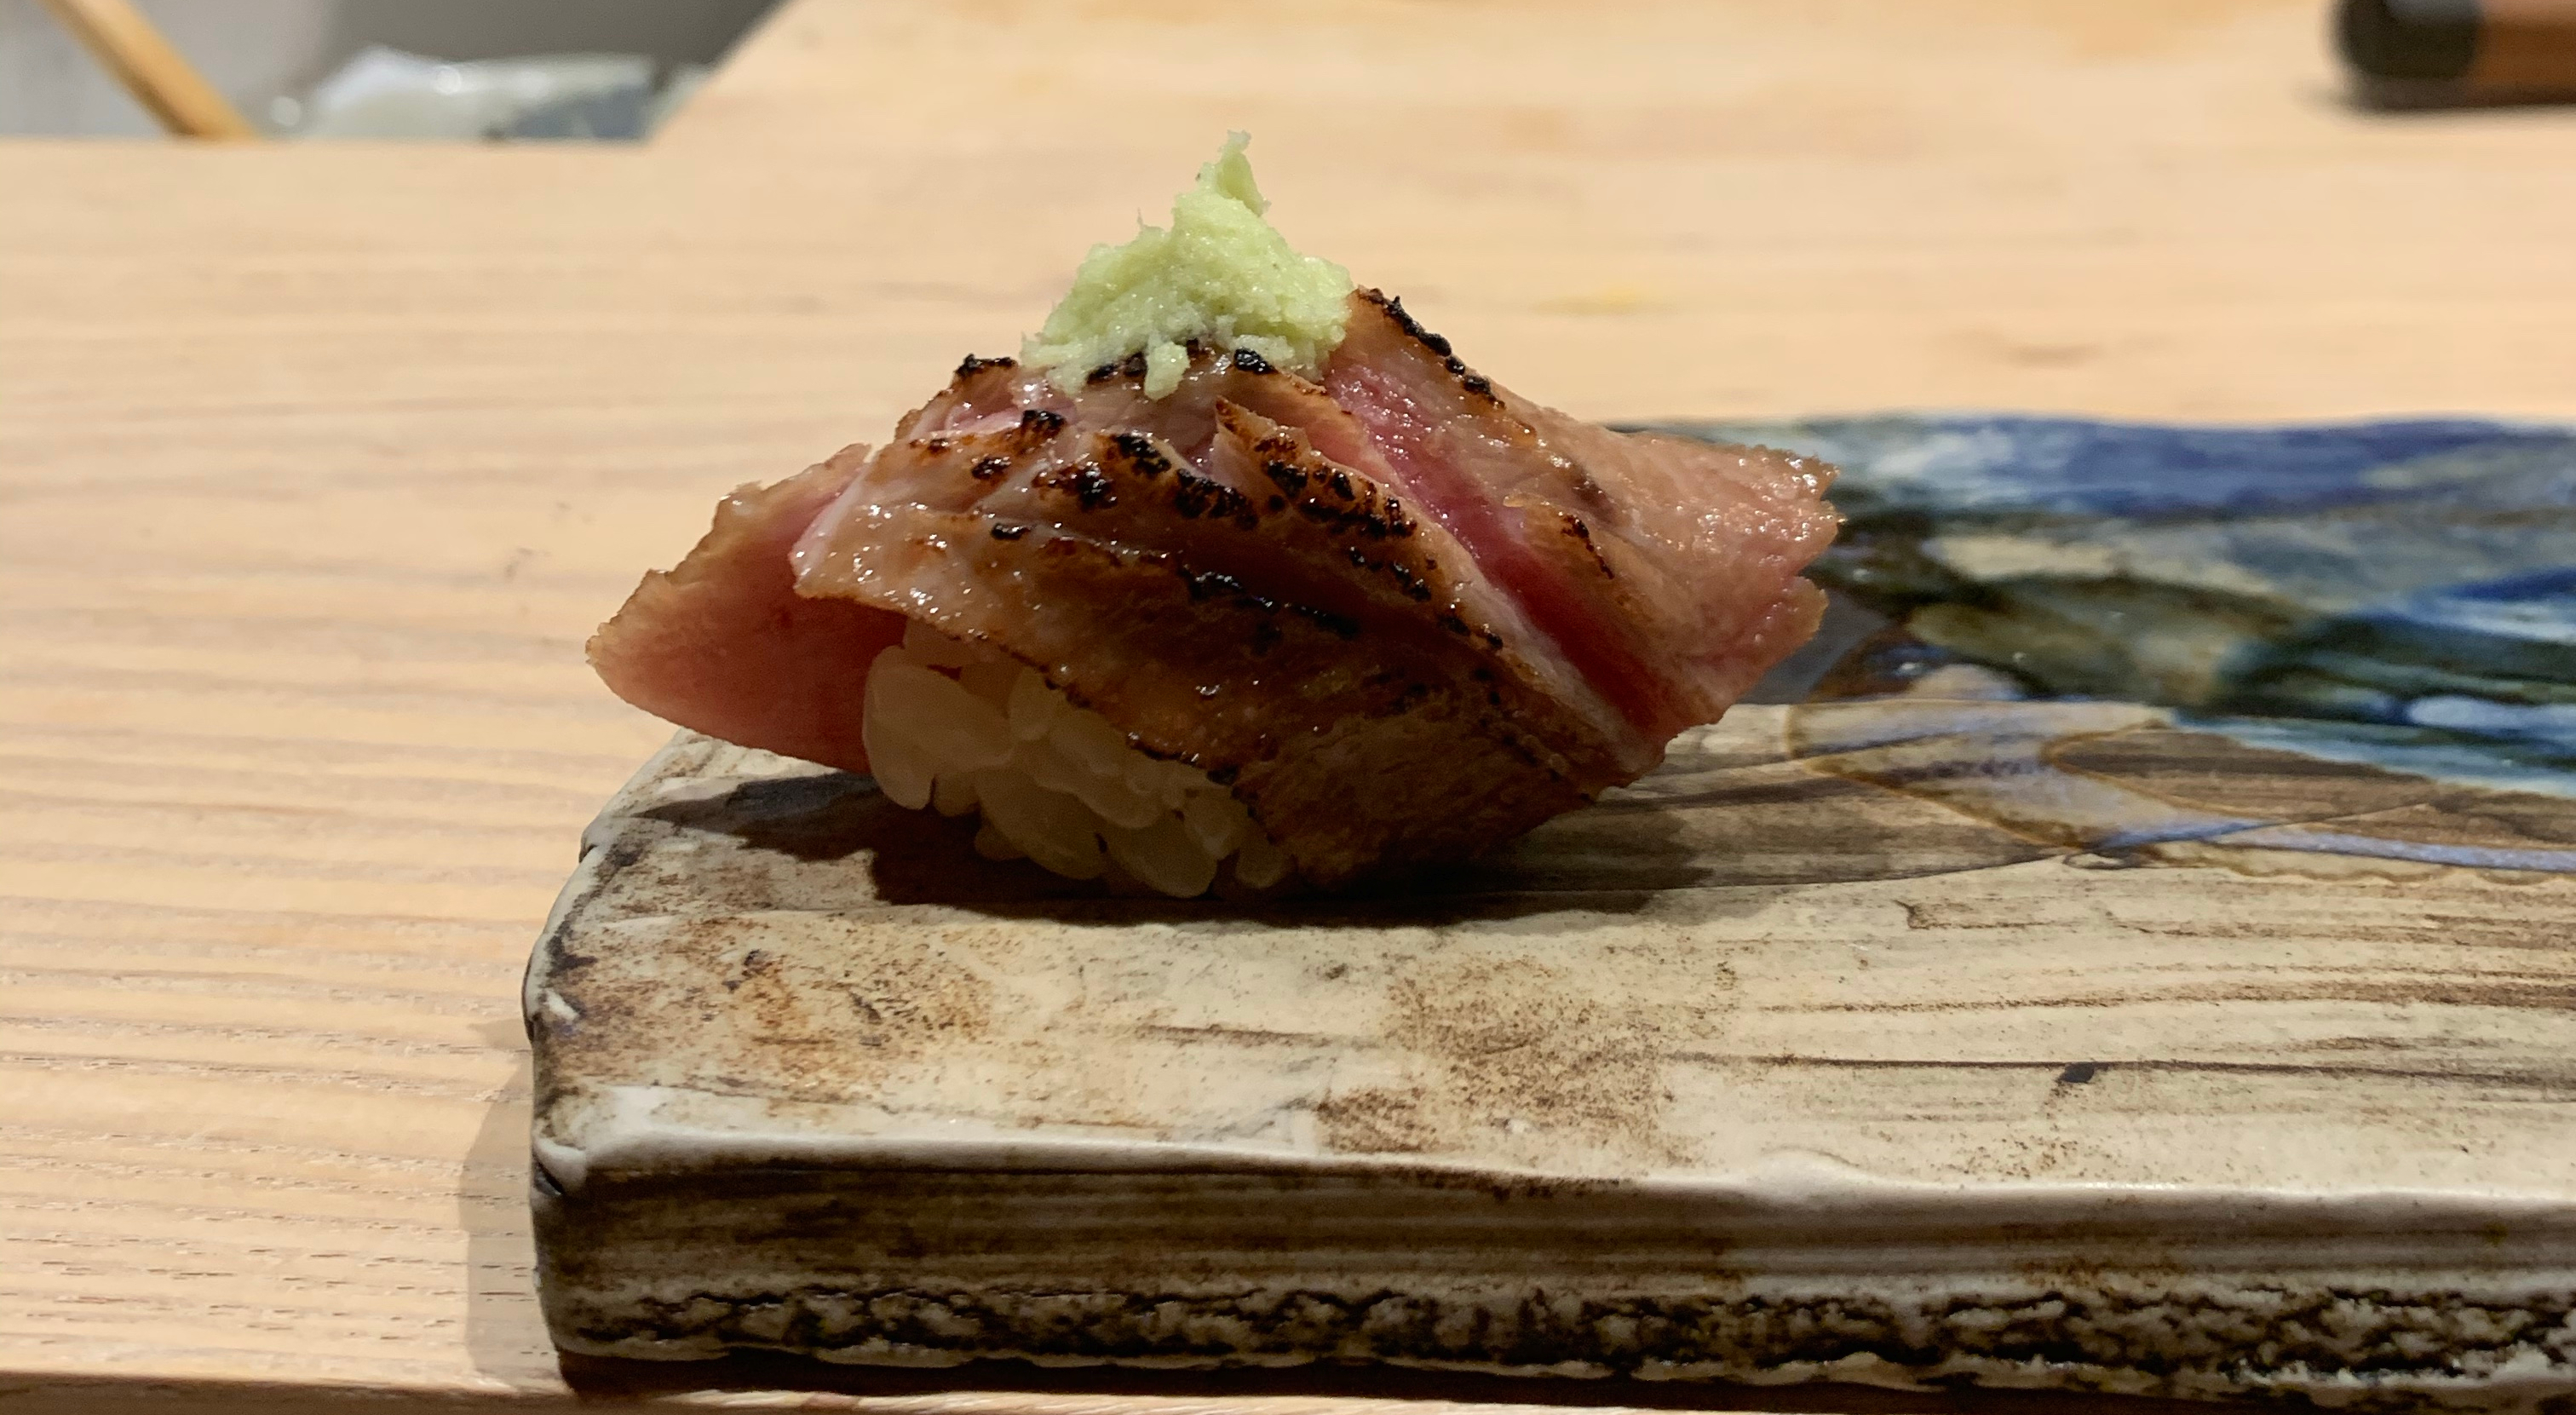 A single piece of nigiri sushi with a seared piece of fish on top. The cooked part is brown, but you can see the red uncooked flesh in some places. It is lightly charred. There is a pile of pale green wasabi on top of the fish.